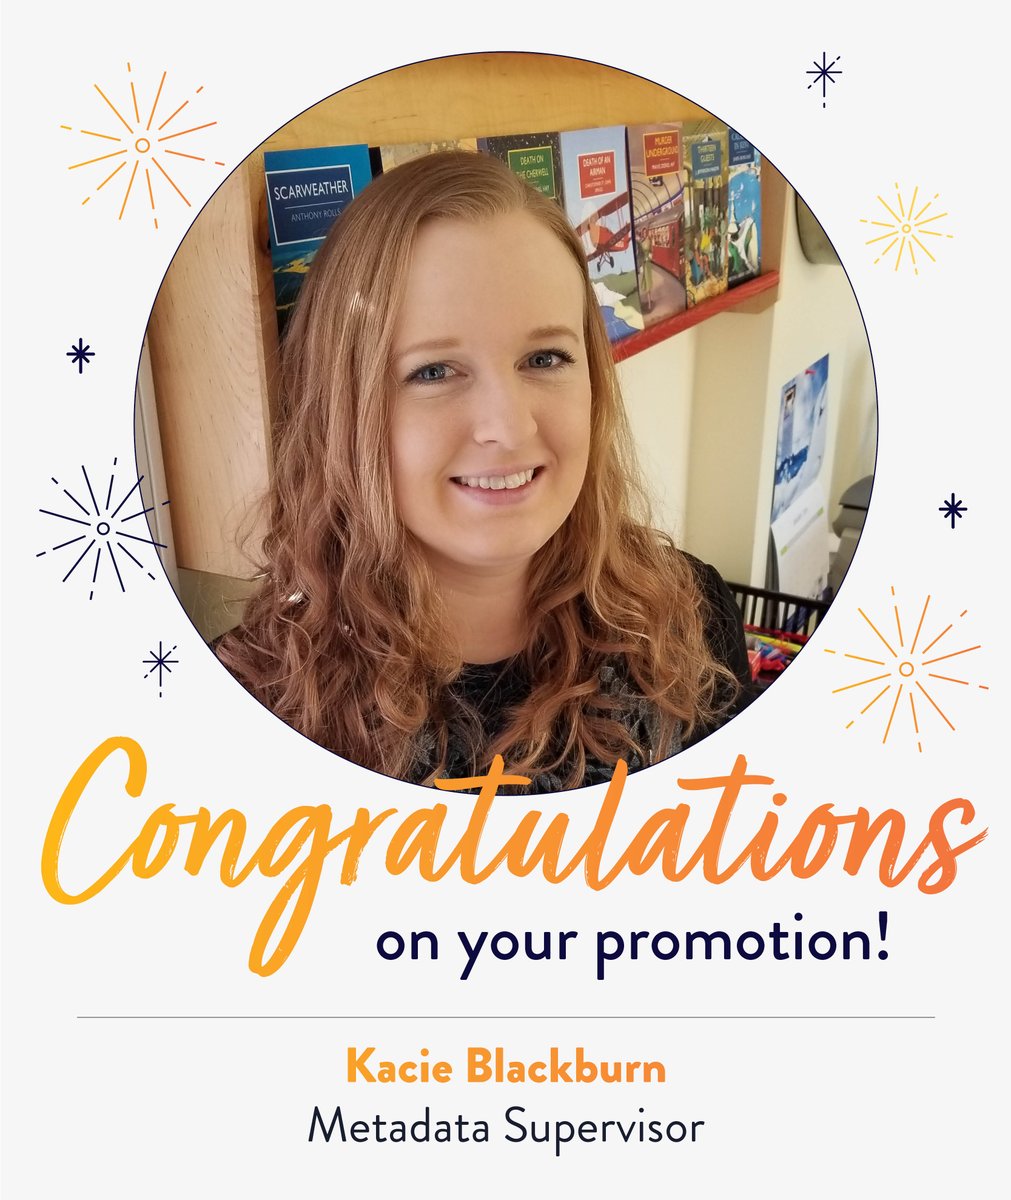 🎉We're excited to share the #promotion of Kacie Blackburn to Metadata Supervisor! 📊Her passion for data accuracy & integrity make her an invaluable part of the metadata team. Kacie will continue to lead as we find new ways to automate workflows, optimize title data, & more!